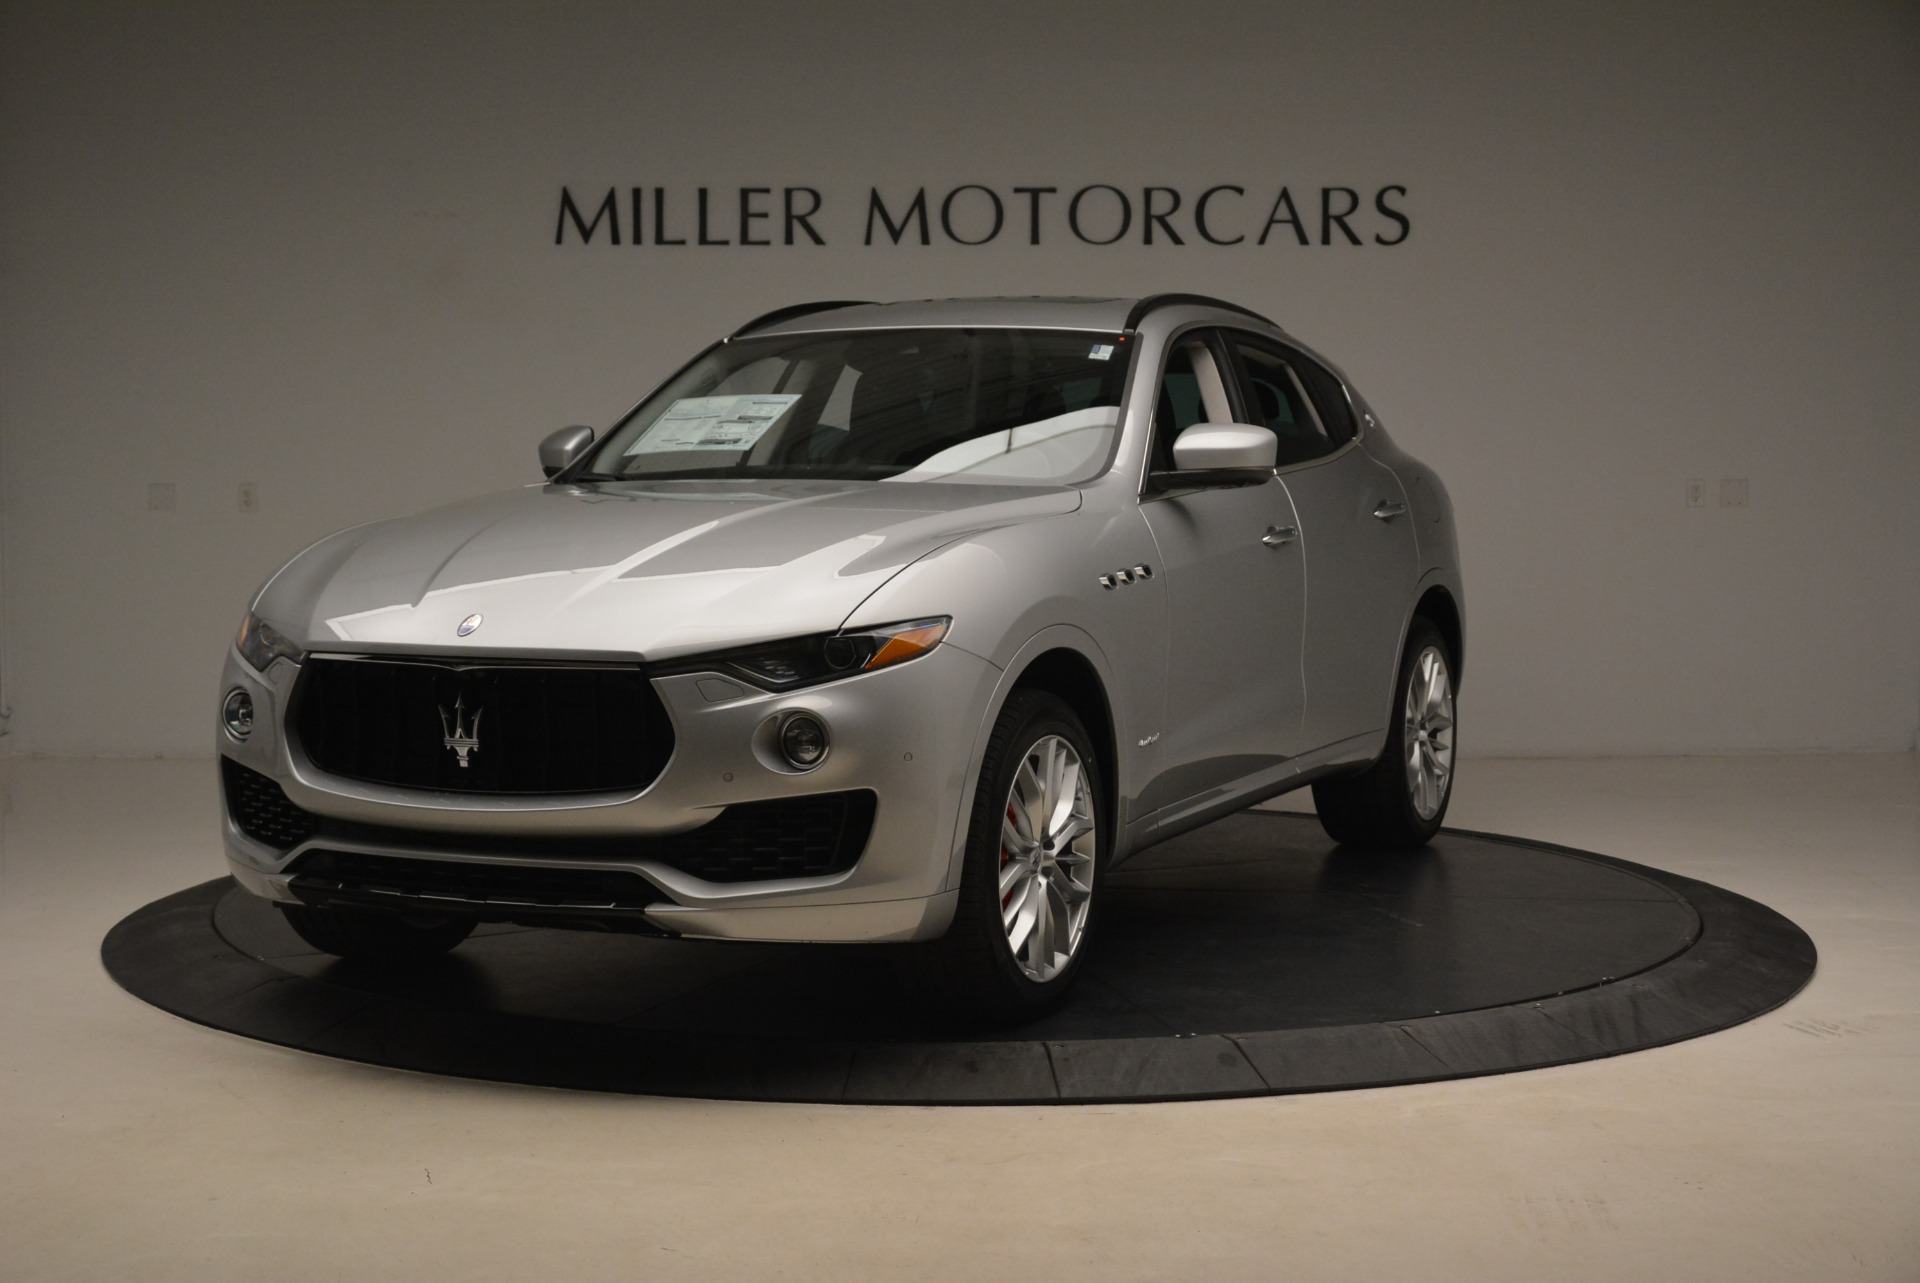 New 2018 Maserati Levante S Q4 GranSport for sale Sold at McLaren Greenwich in Greenwich CT 06830 1